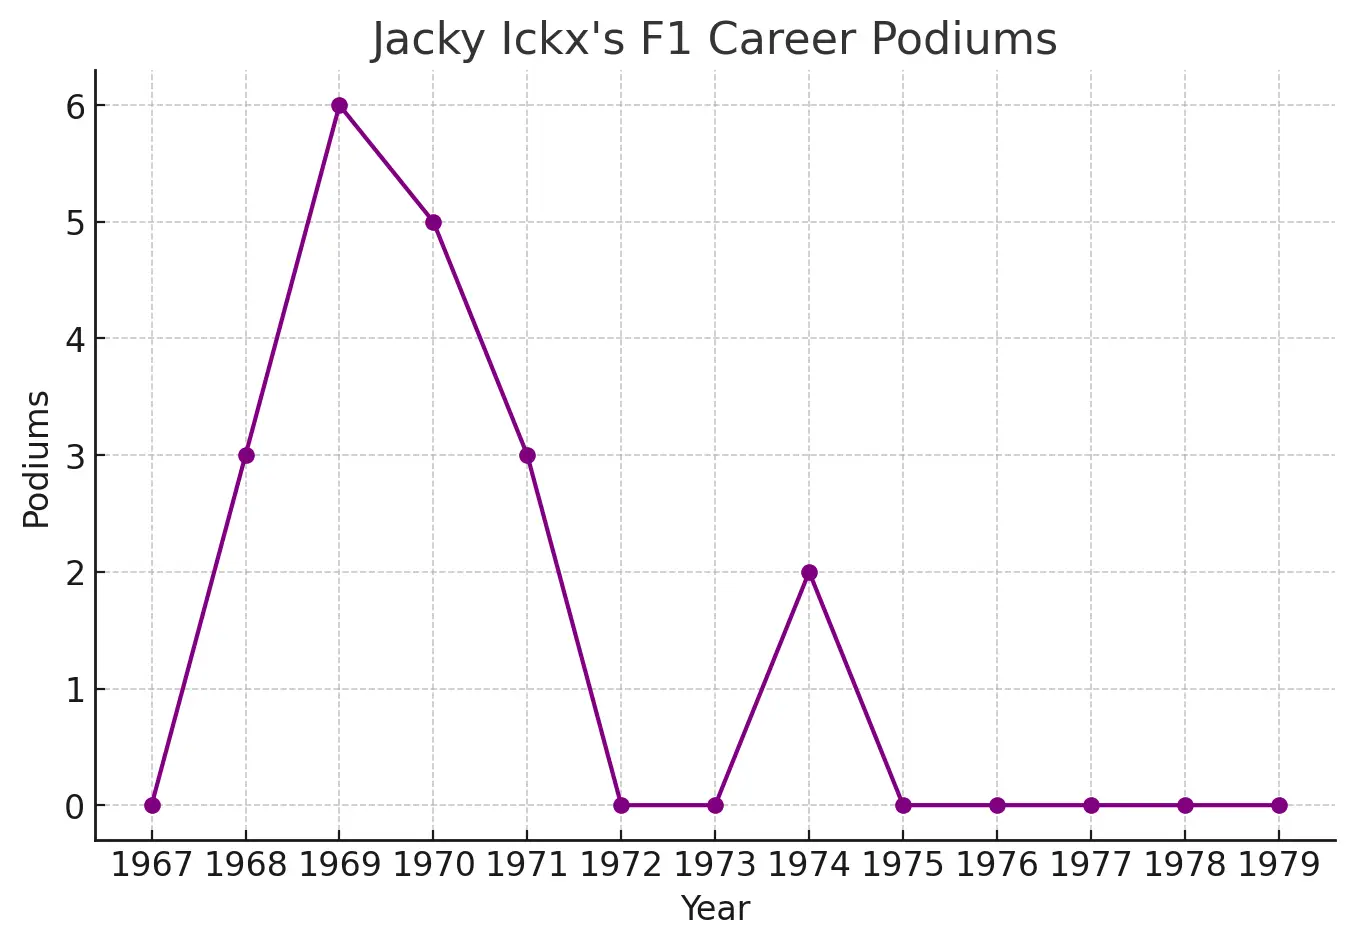 Jacques Bernard Ickx  - career podiums, with a notable increase during his most competitive years, reflecting his consistent performance and ability to secure top finishes.